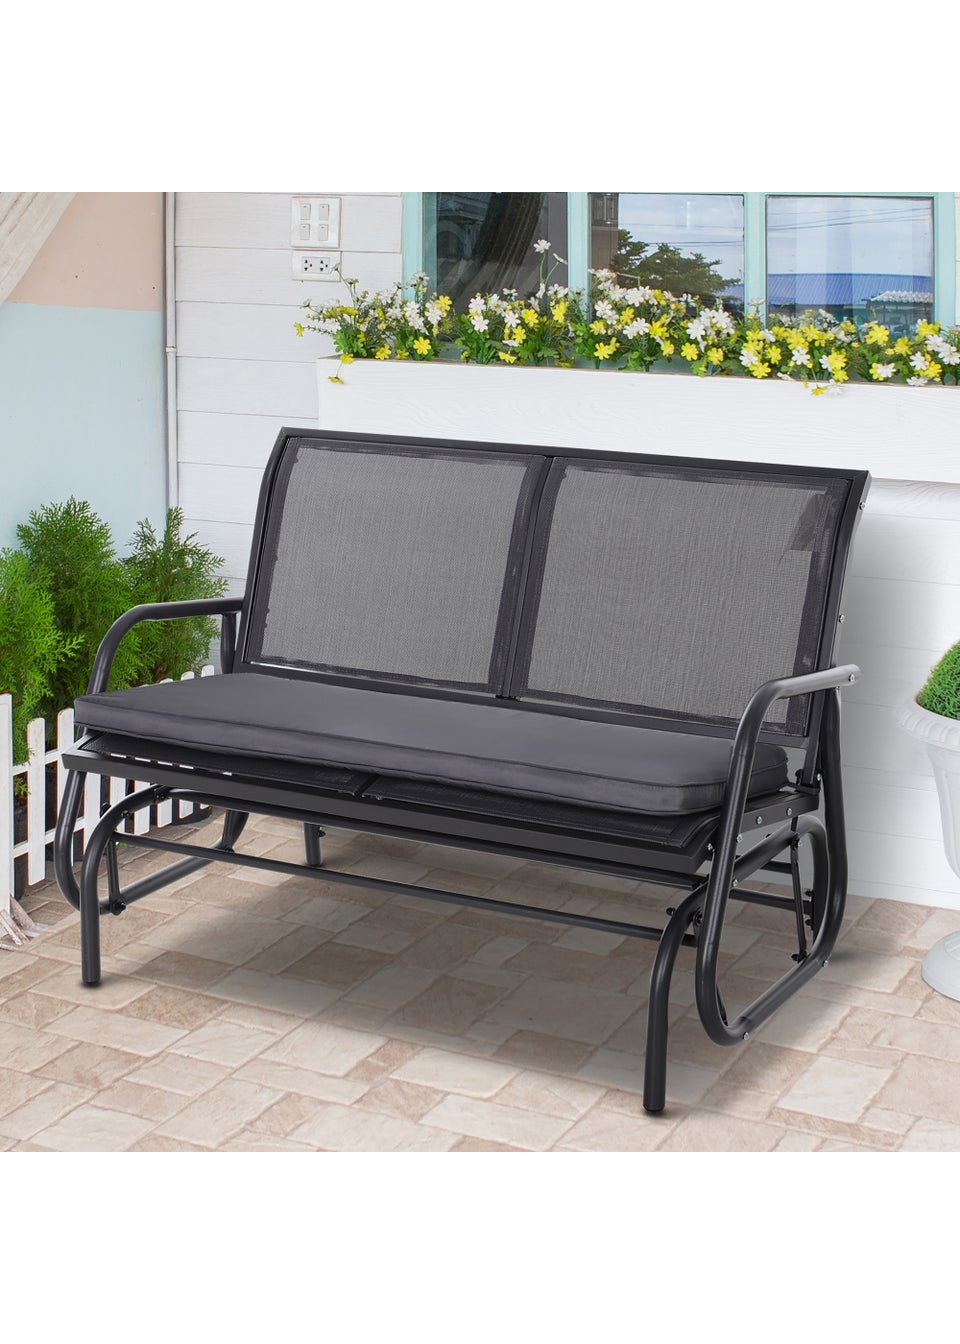 Outsunny 2 Seater Bench Swing Cushion (110cm x 46cm x 5cm)